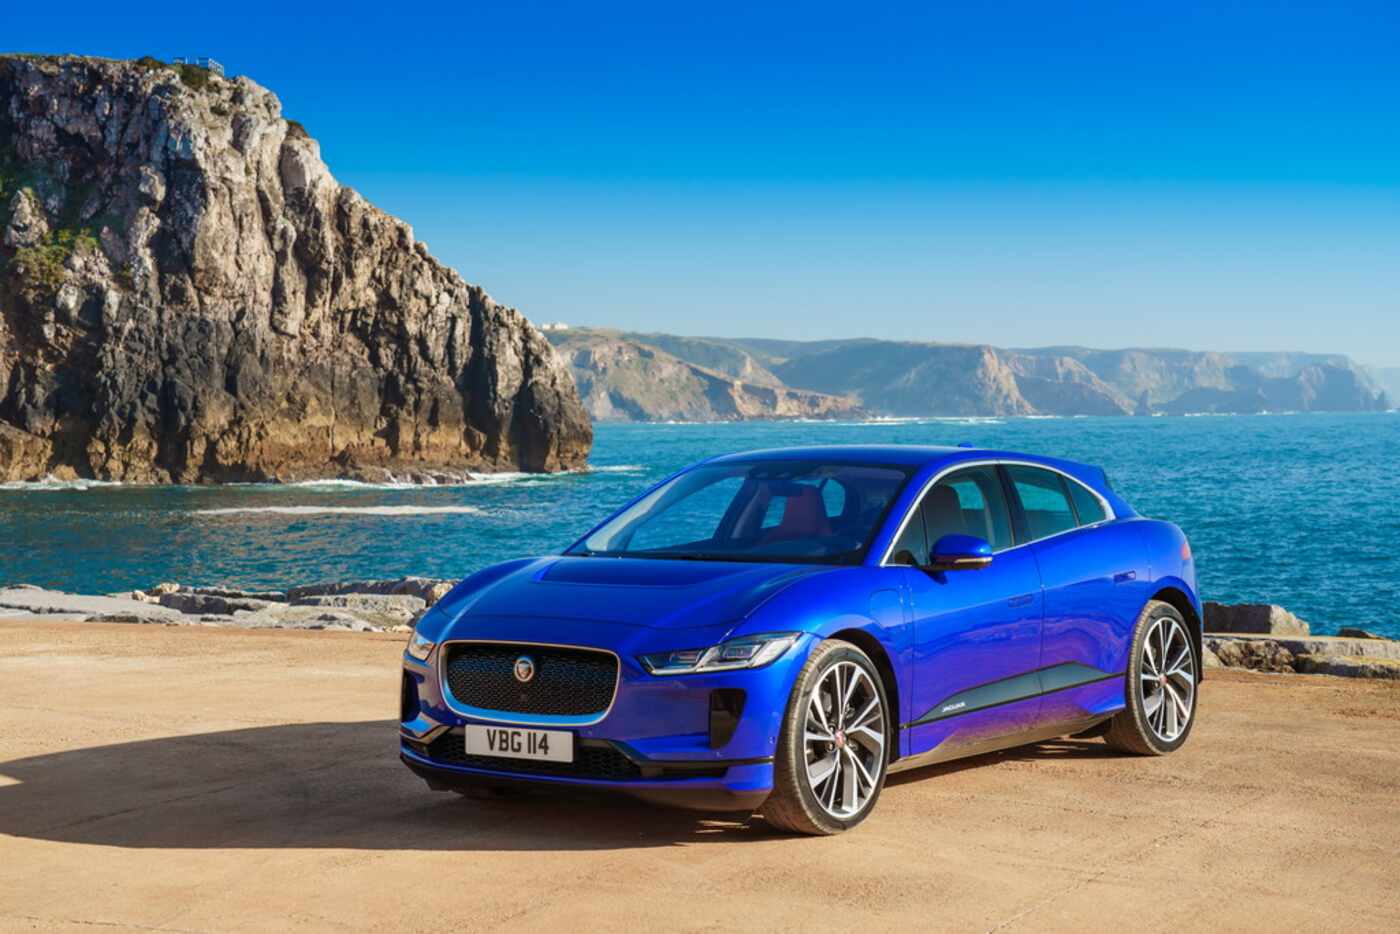 The 2019 Jaguar I-Pace Global Drive in Portugal.